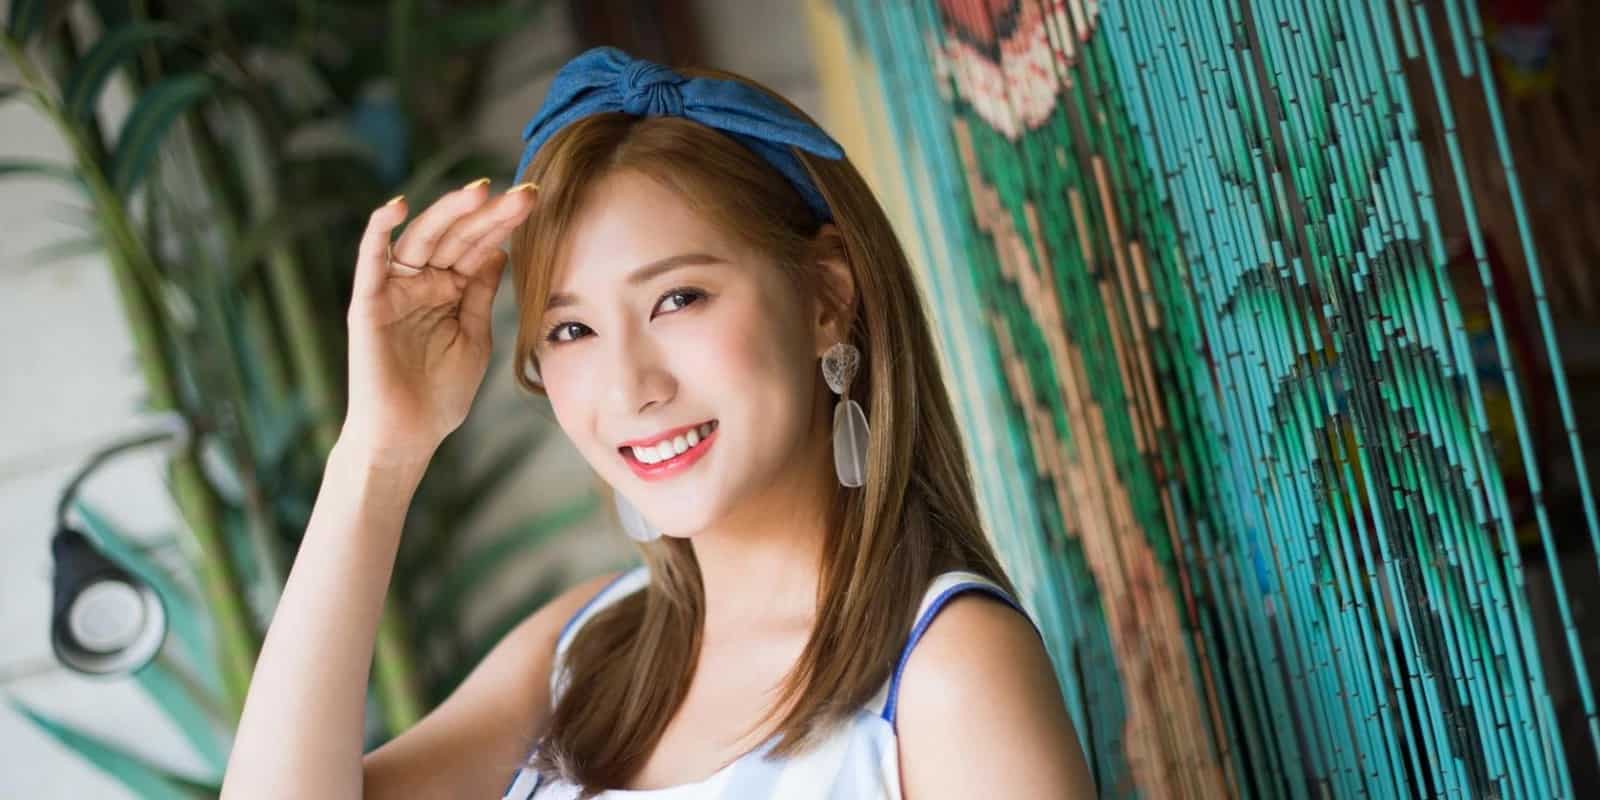 Oh Ha-young